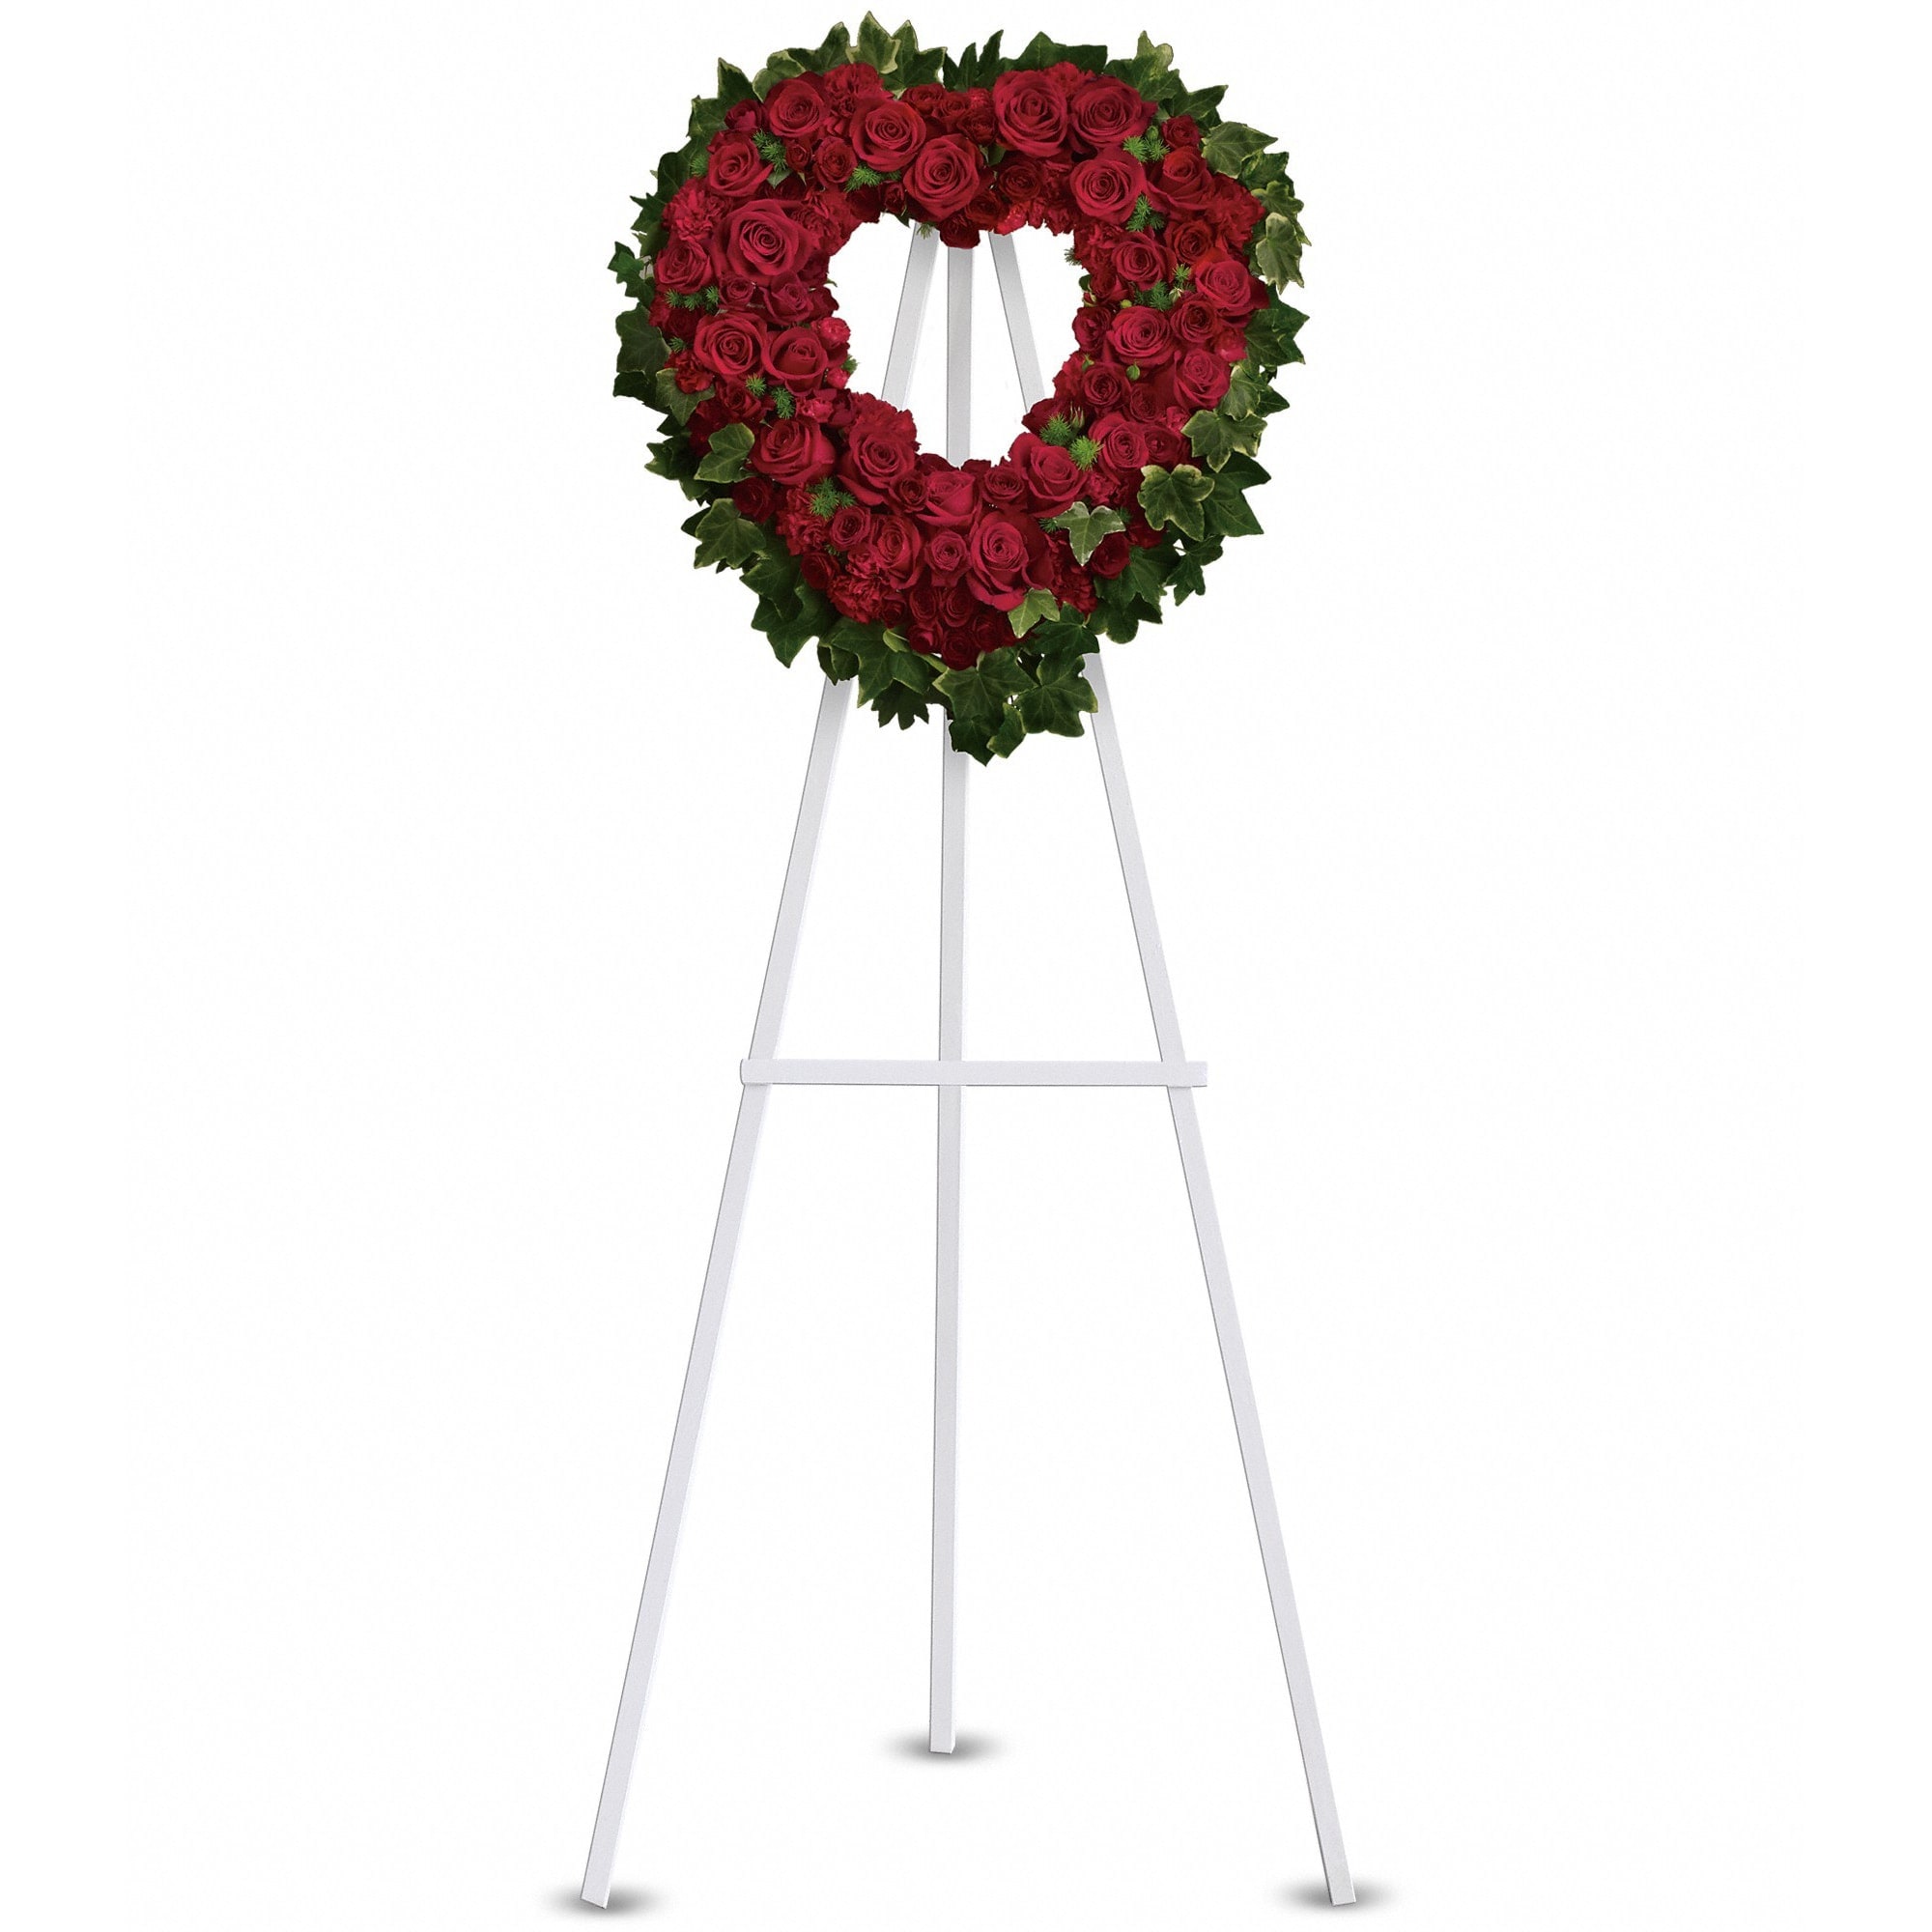 Blessed Heart by Teleflora - A beautiful heart is a wonderful way to share your thoughts of love. 